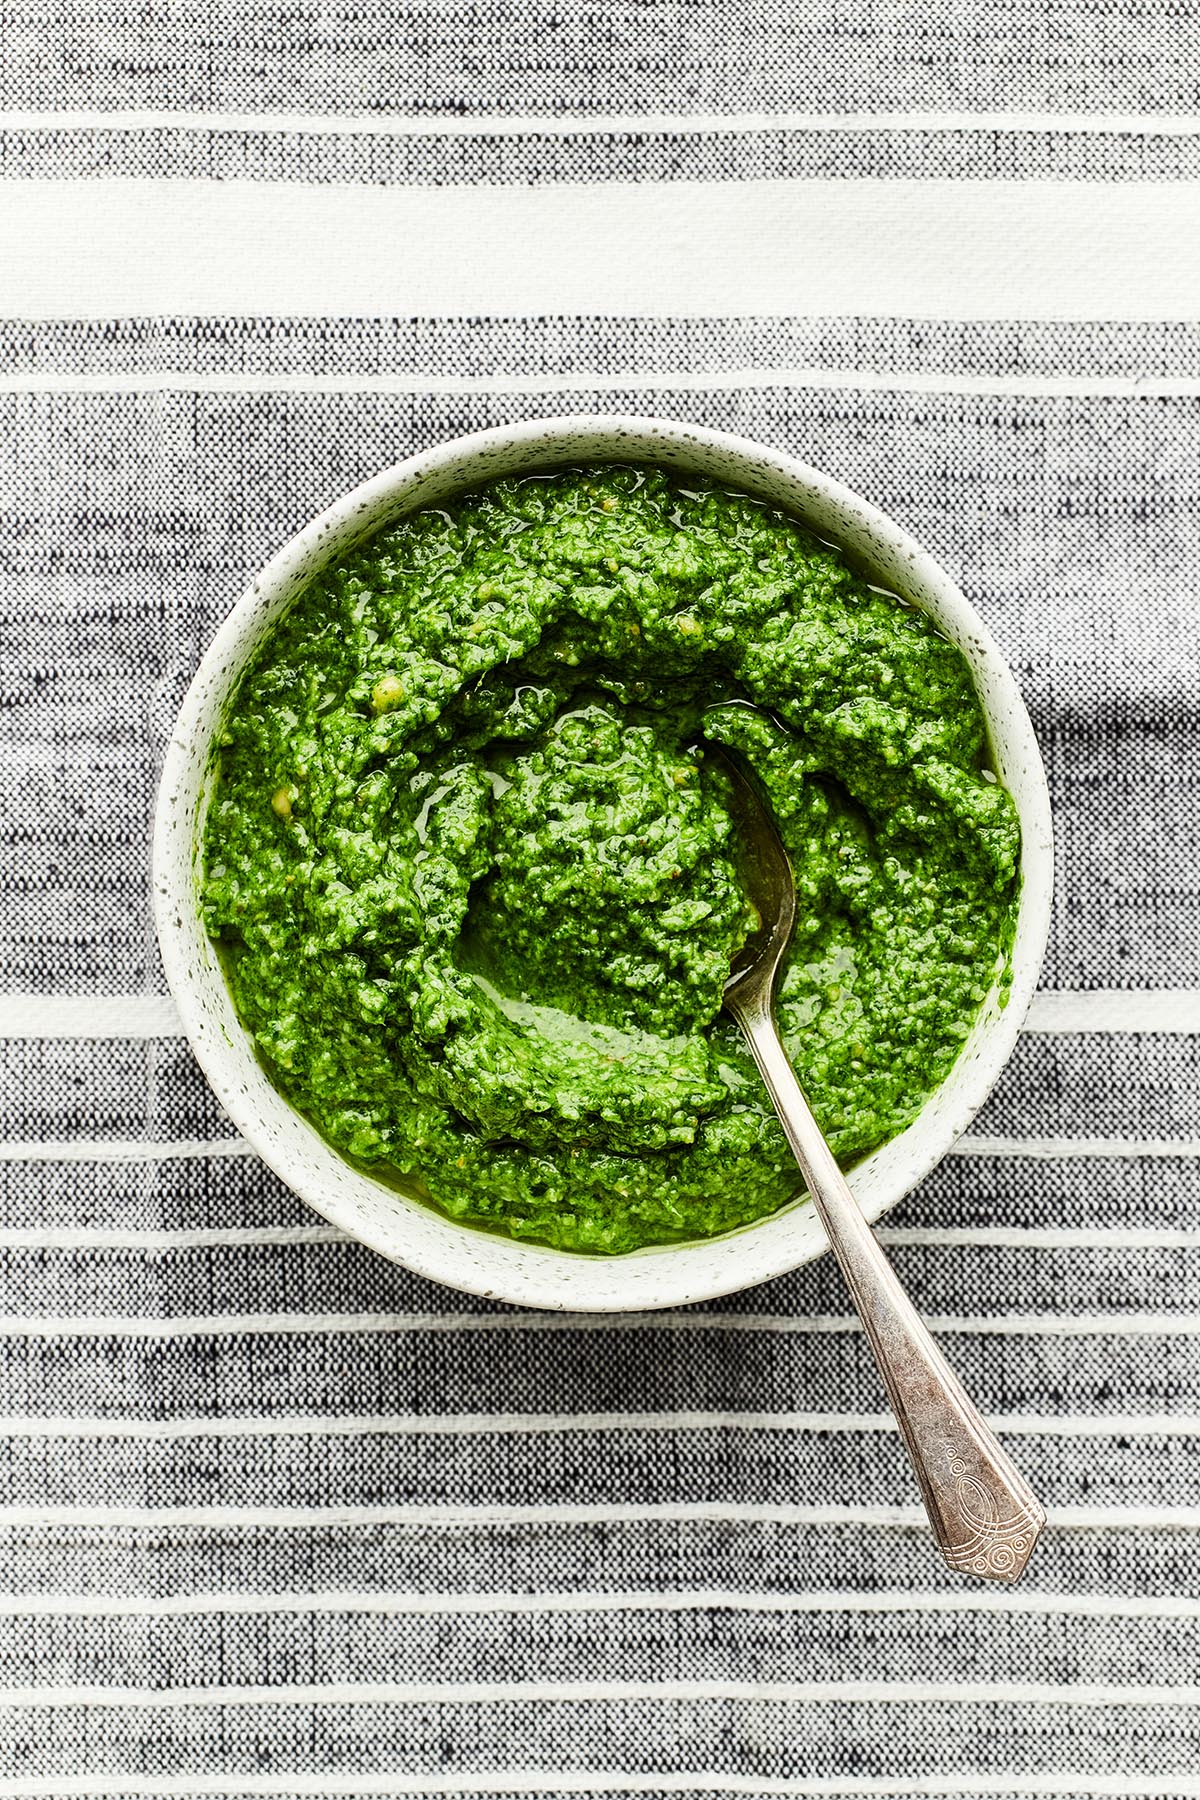 A bowl of homemade basil pesto with a spoon in the bowl on a striped tablecloth.